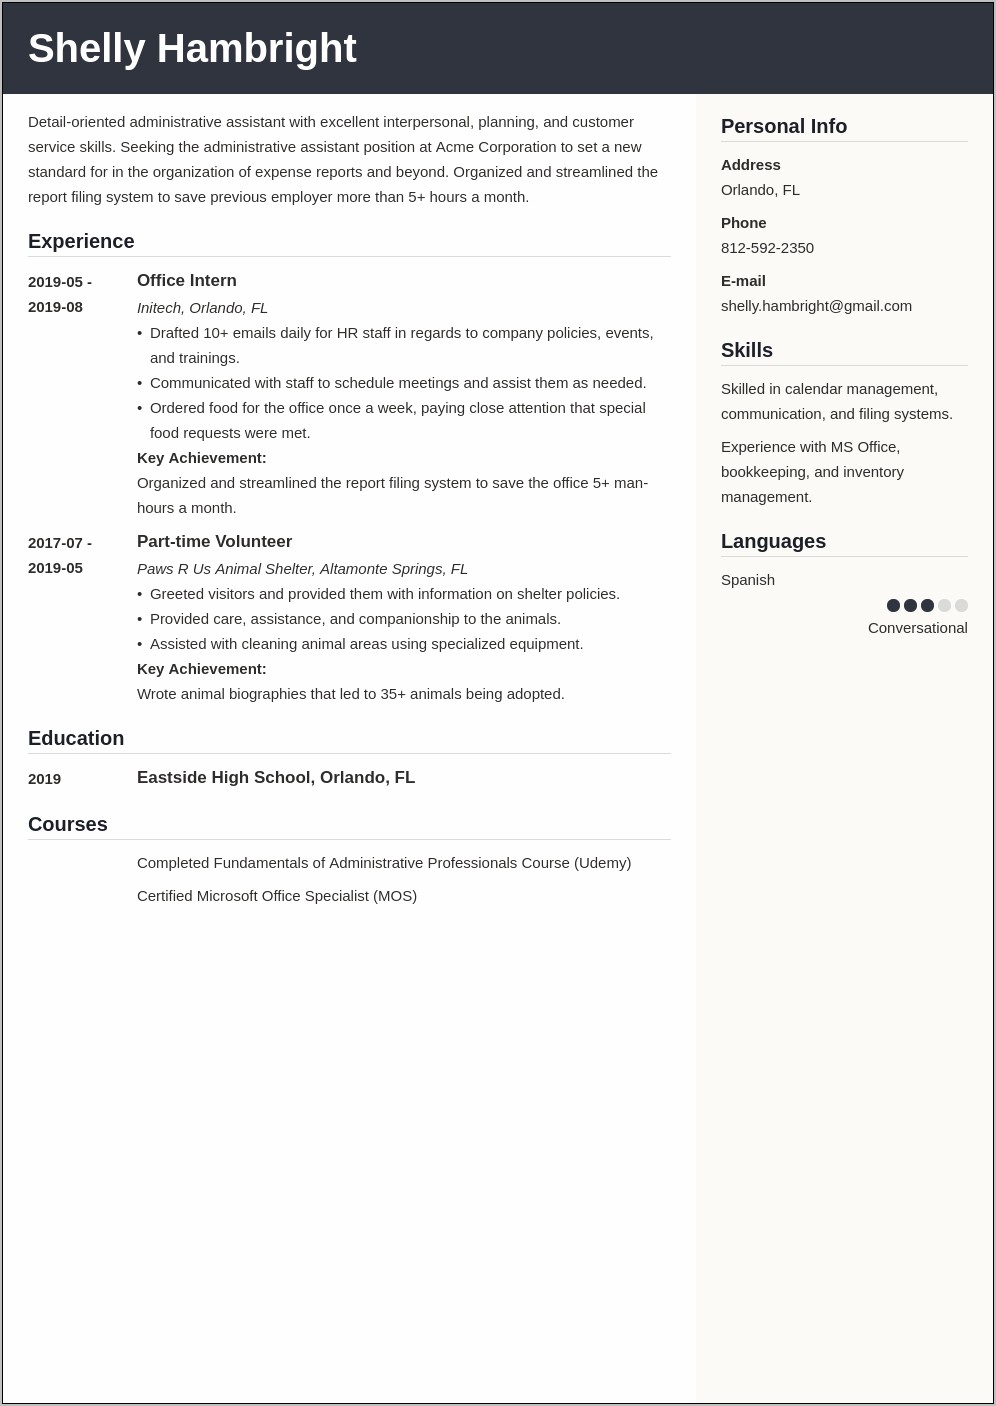 Administraive Work As A Skill On Resume